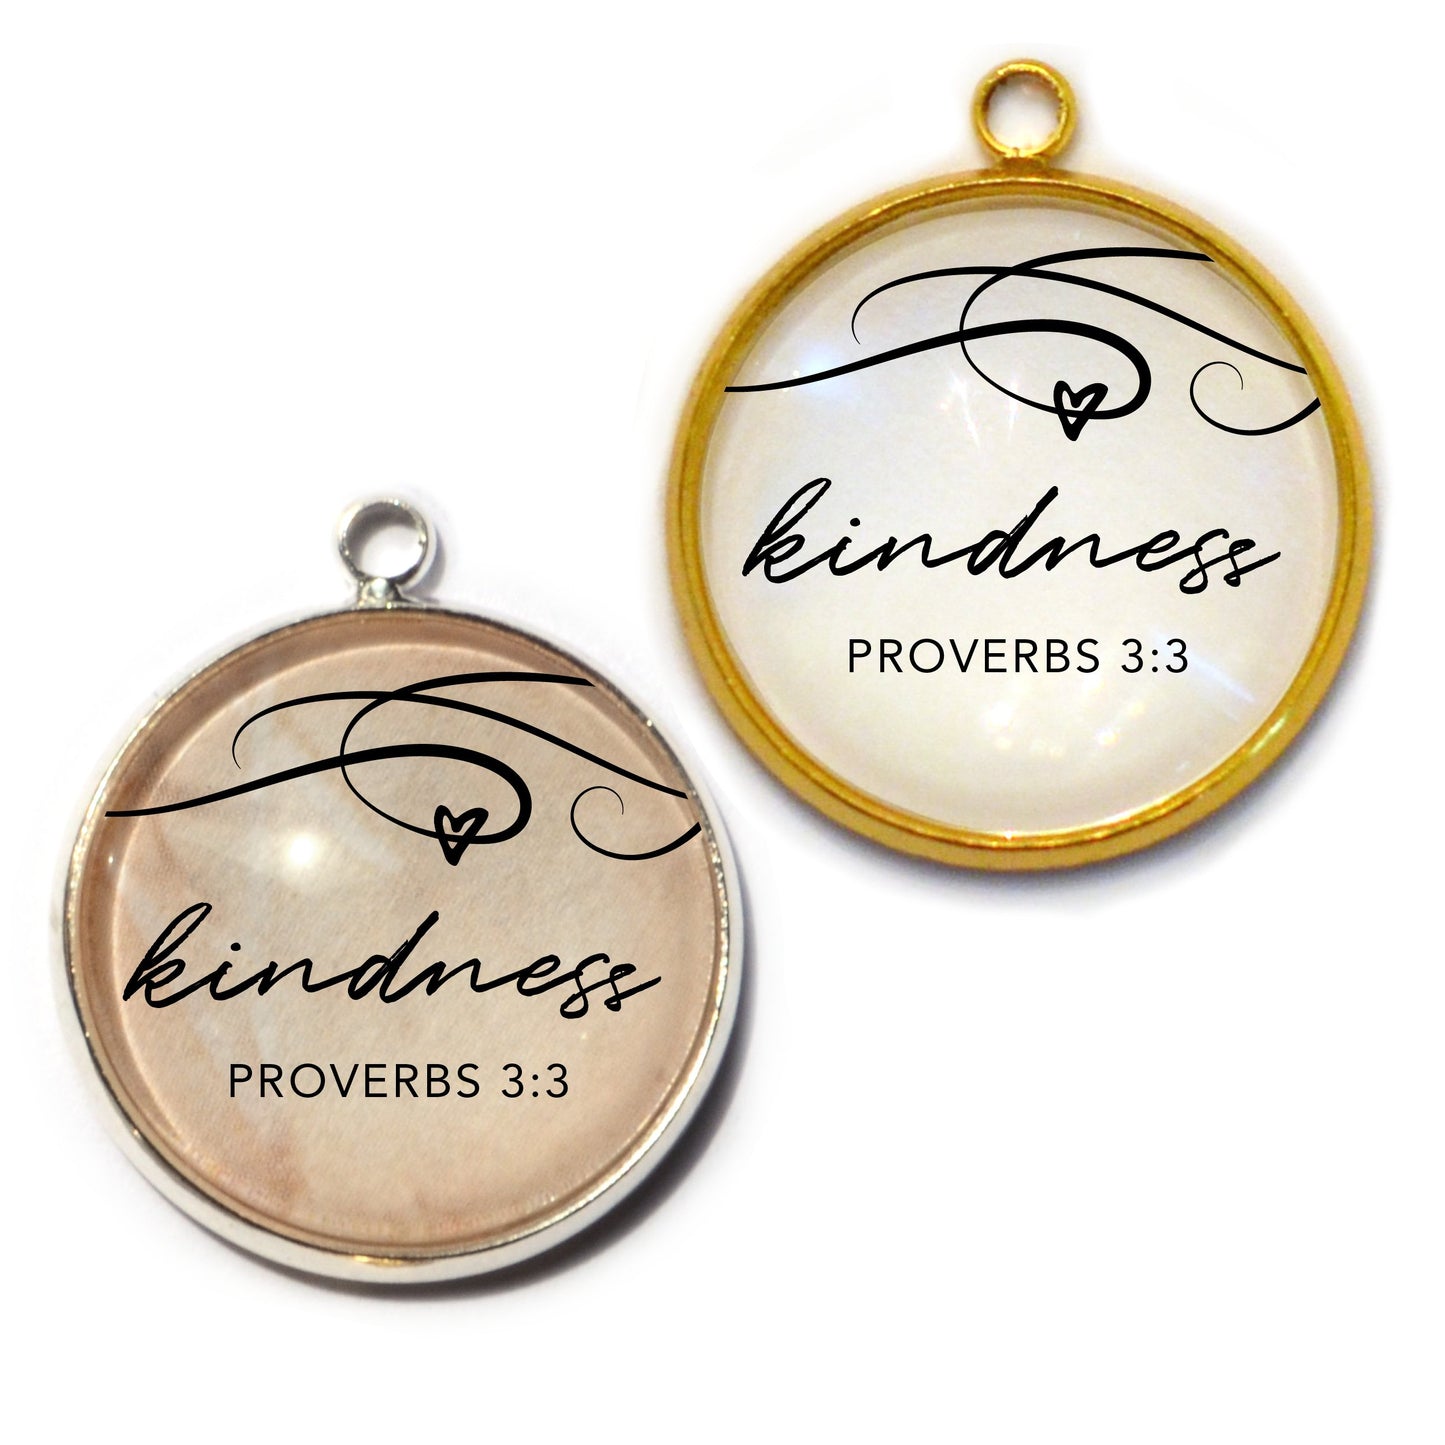 "Kindness" Proverbs 3:3 Scripture Charms for Jewelry Making